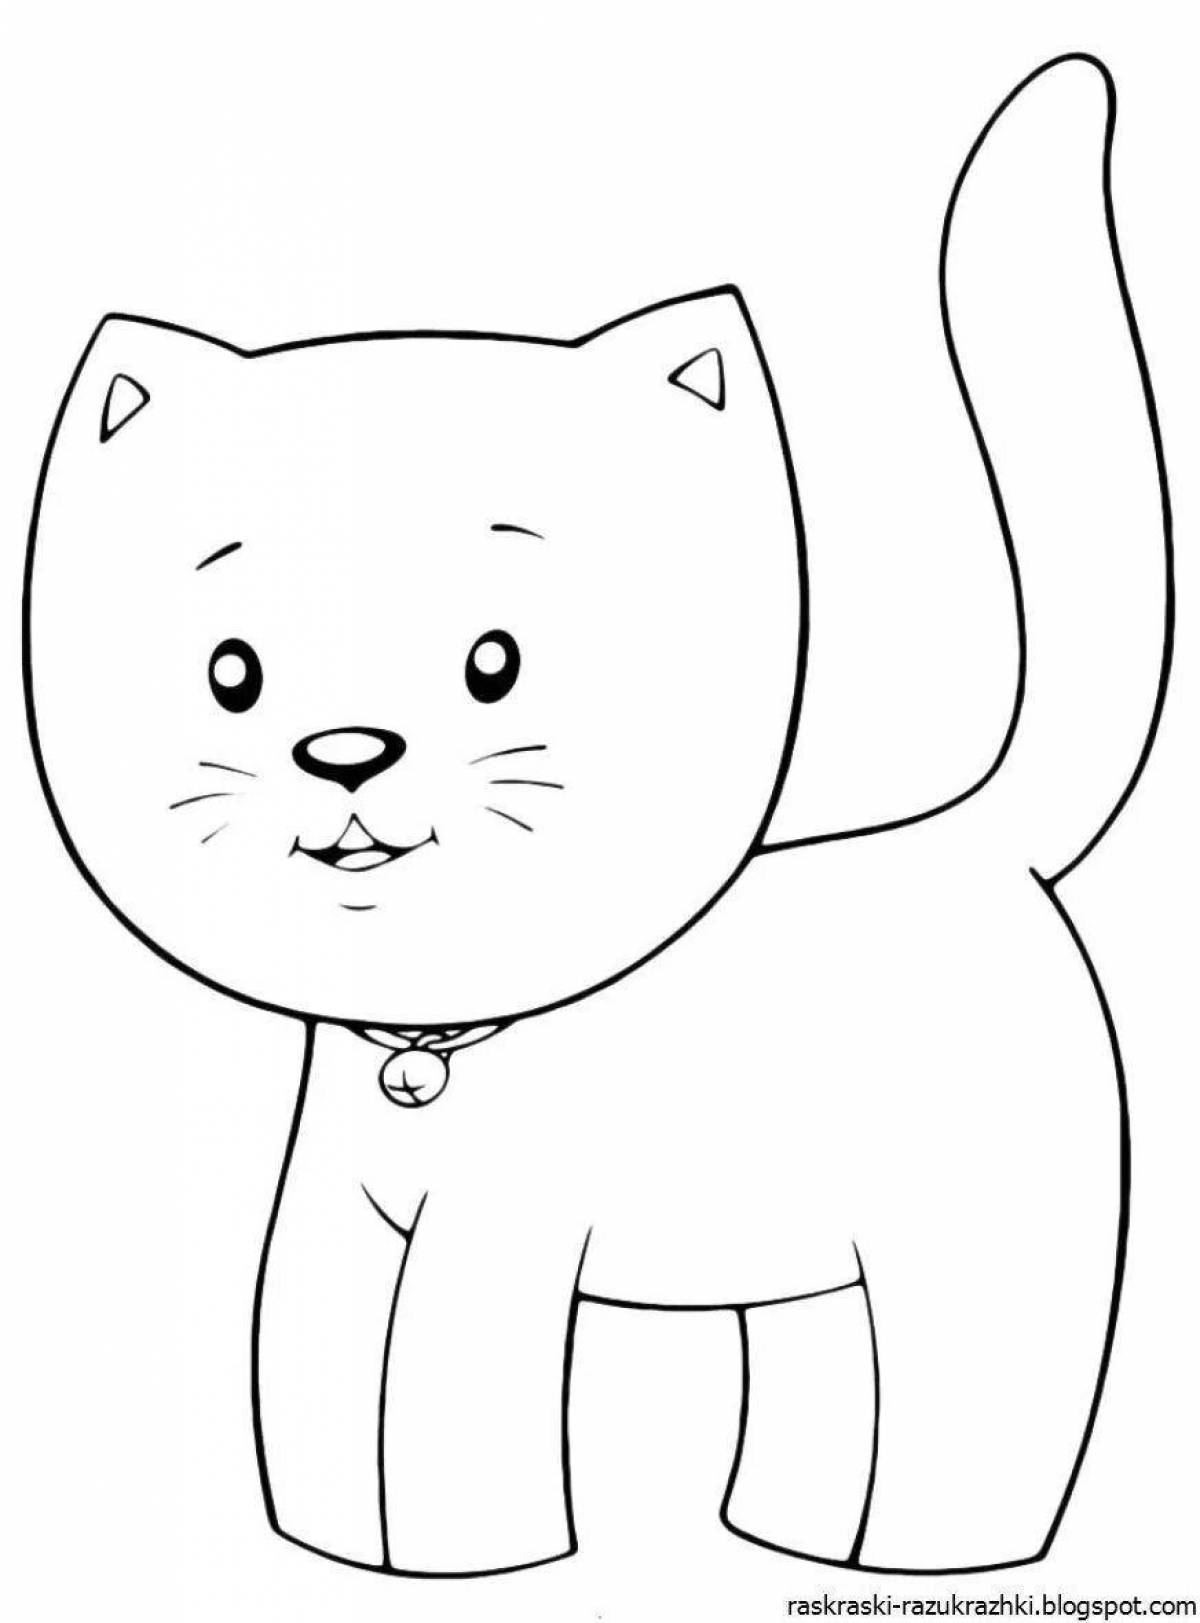 Coloring page cheeky cat for kids